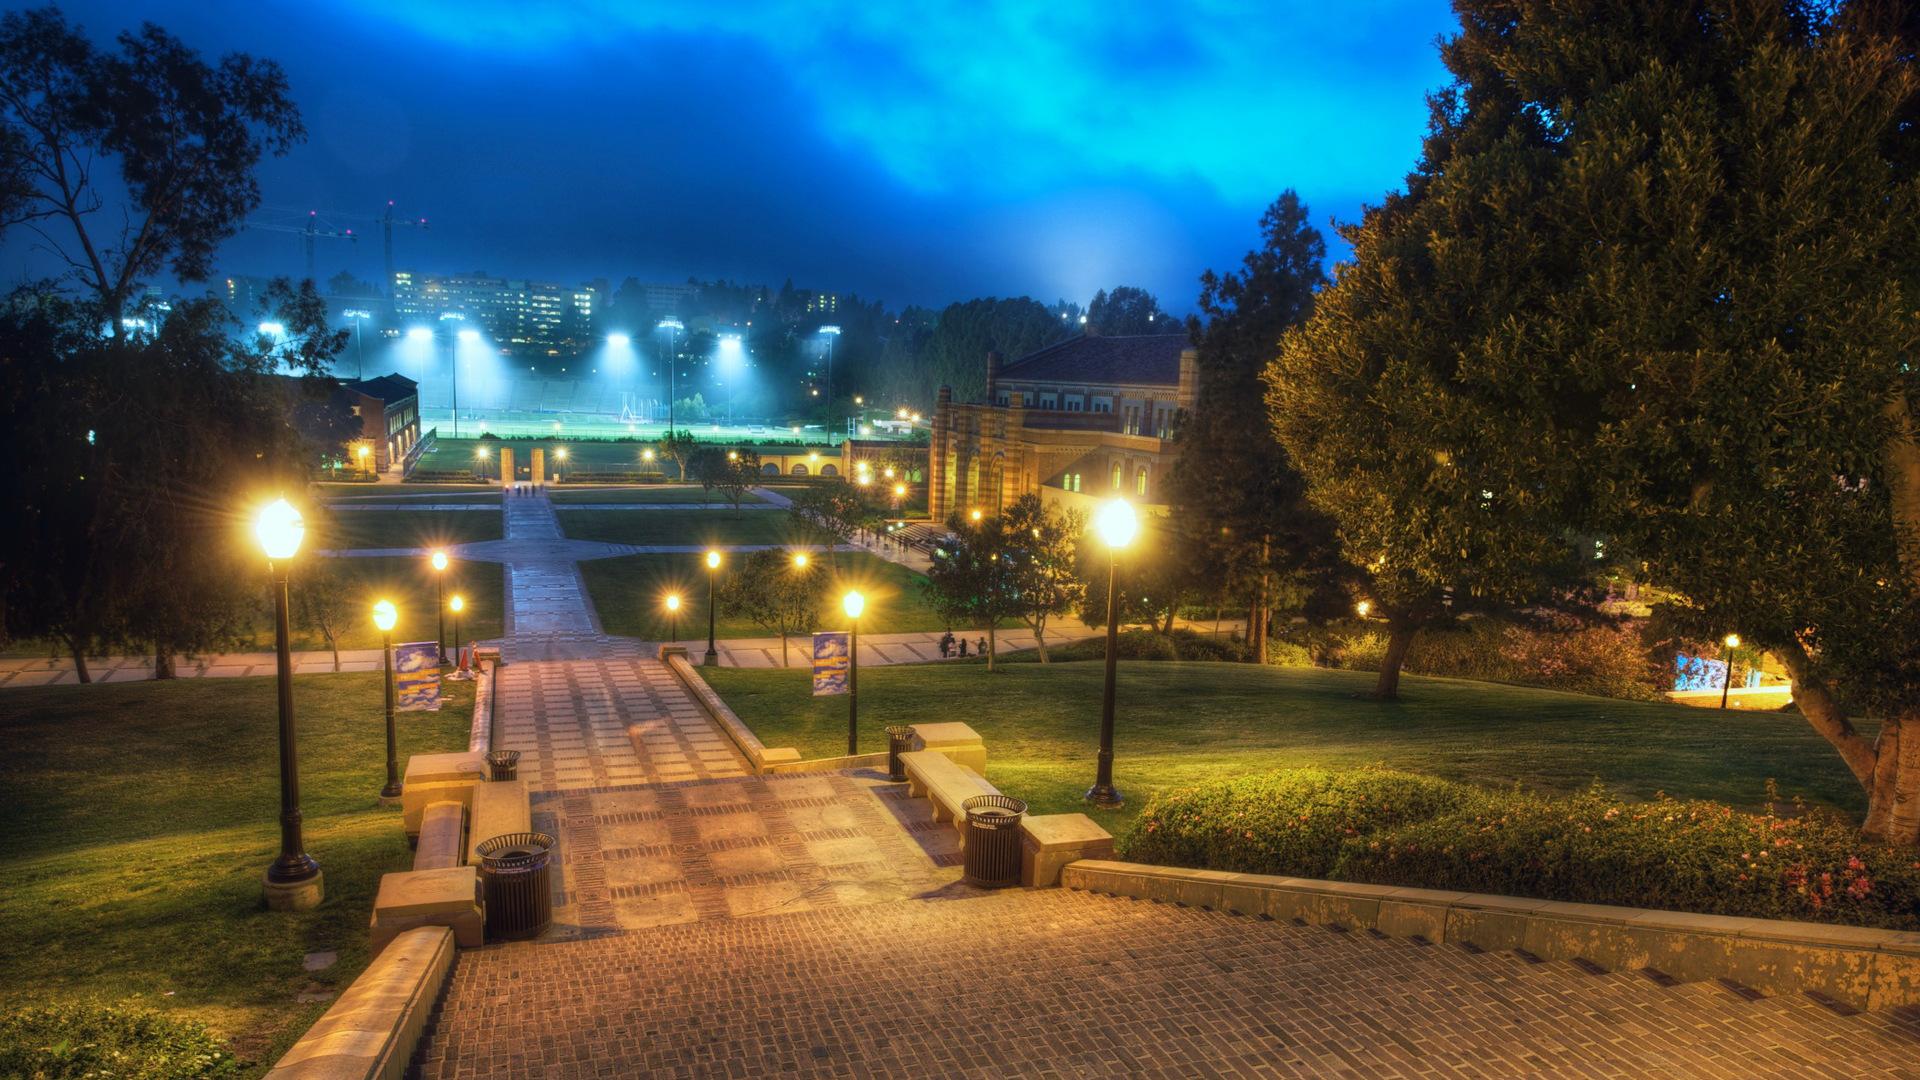 Campus Of Ucla In Westwood Los Angeles High Quality And